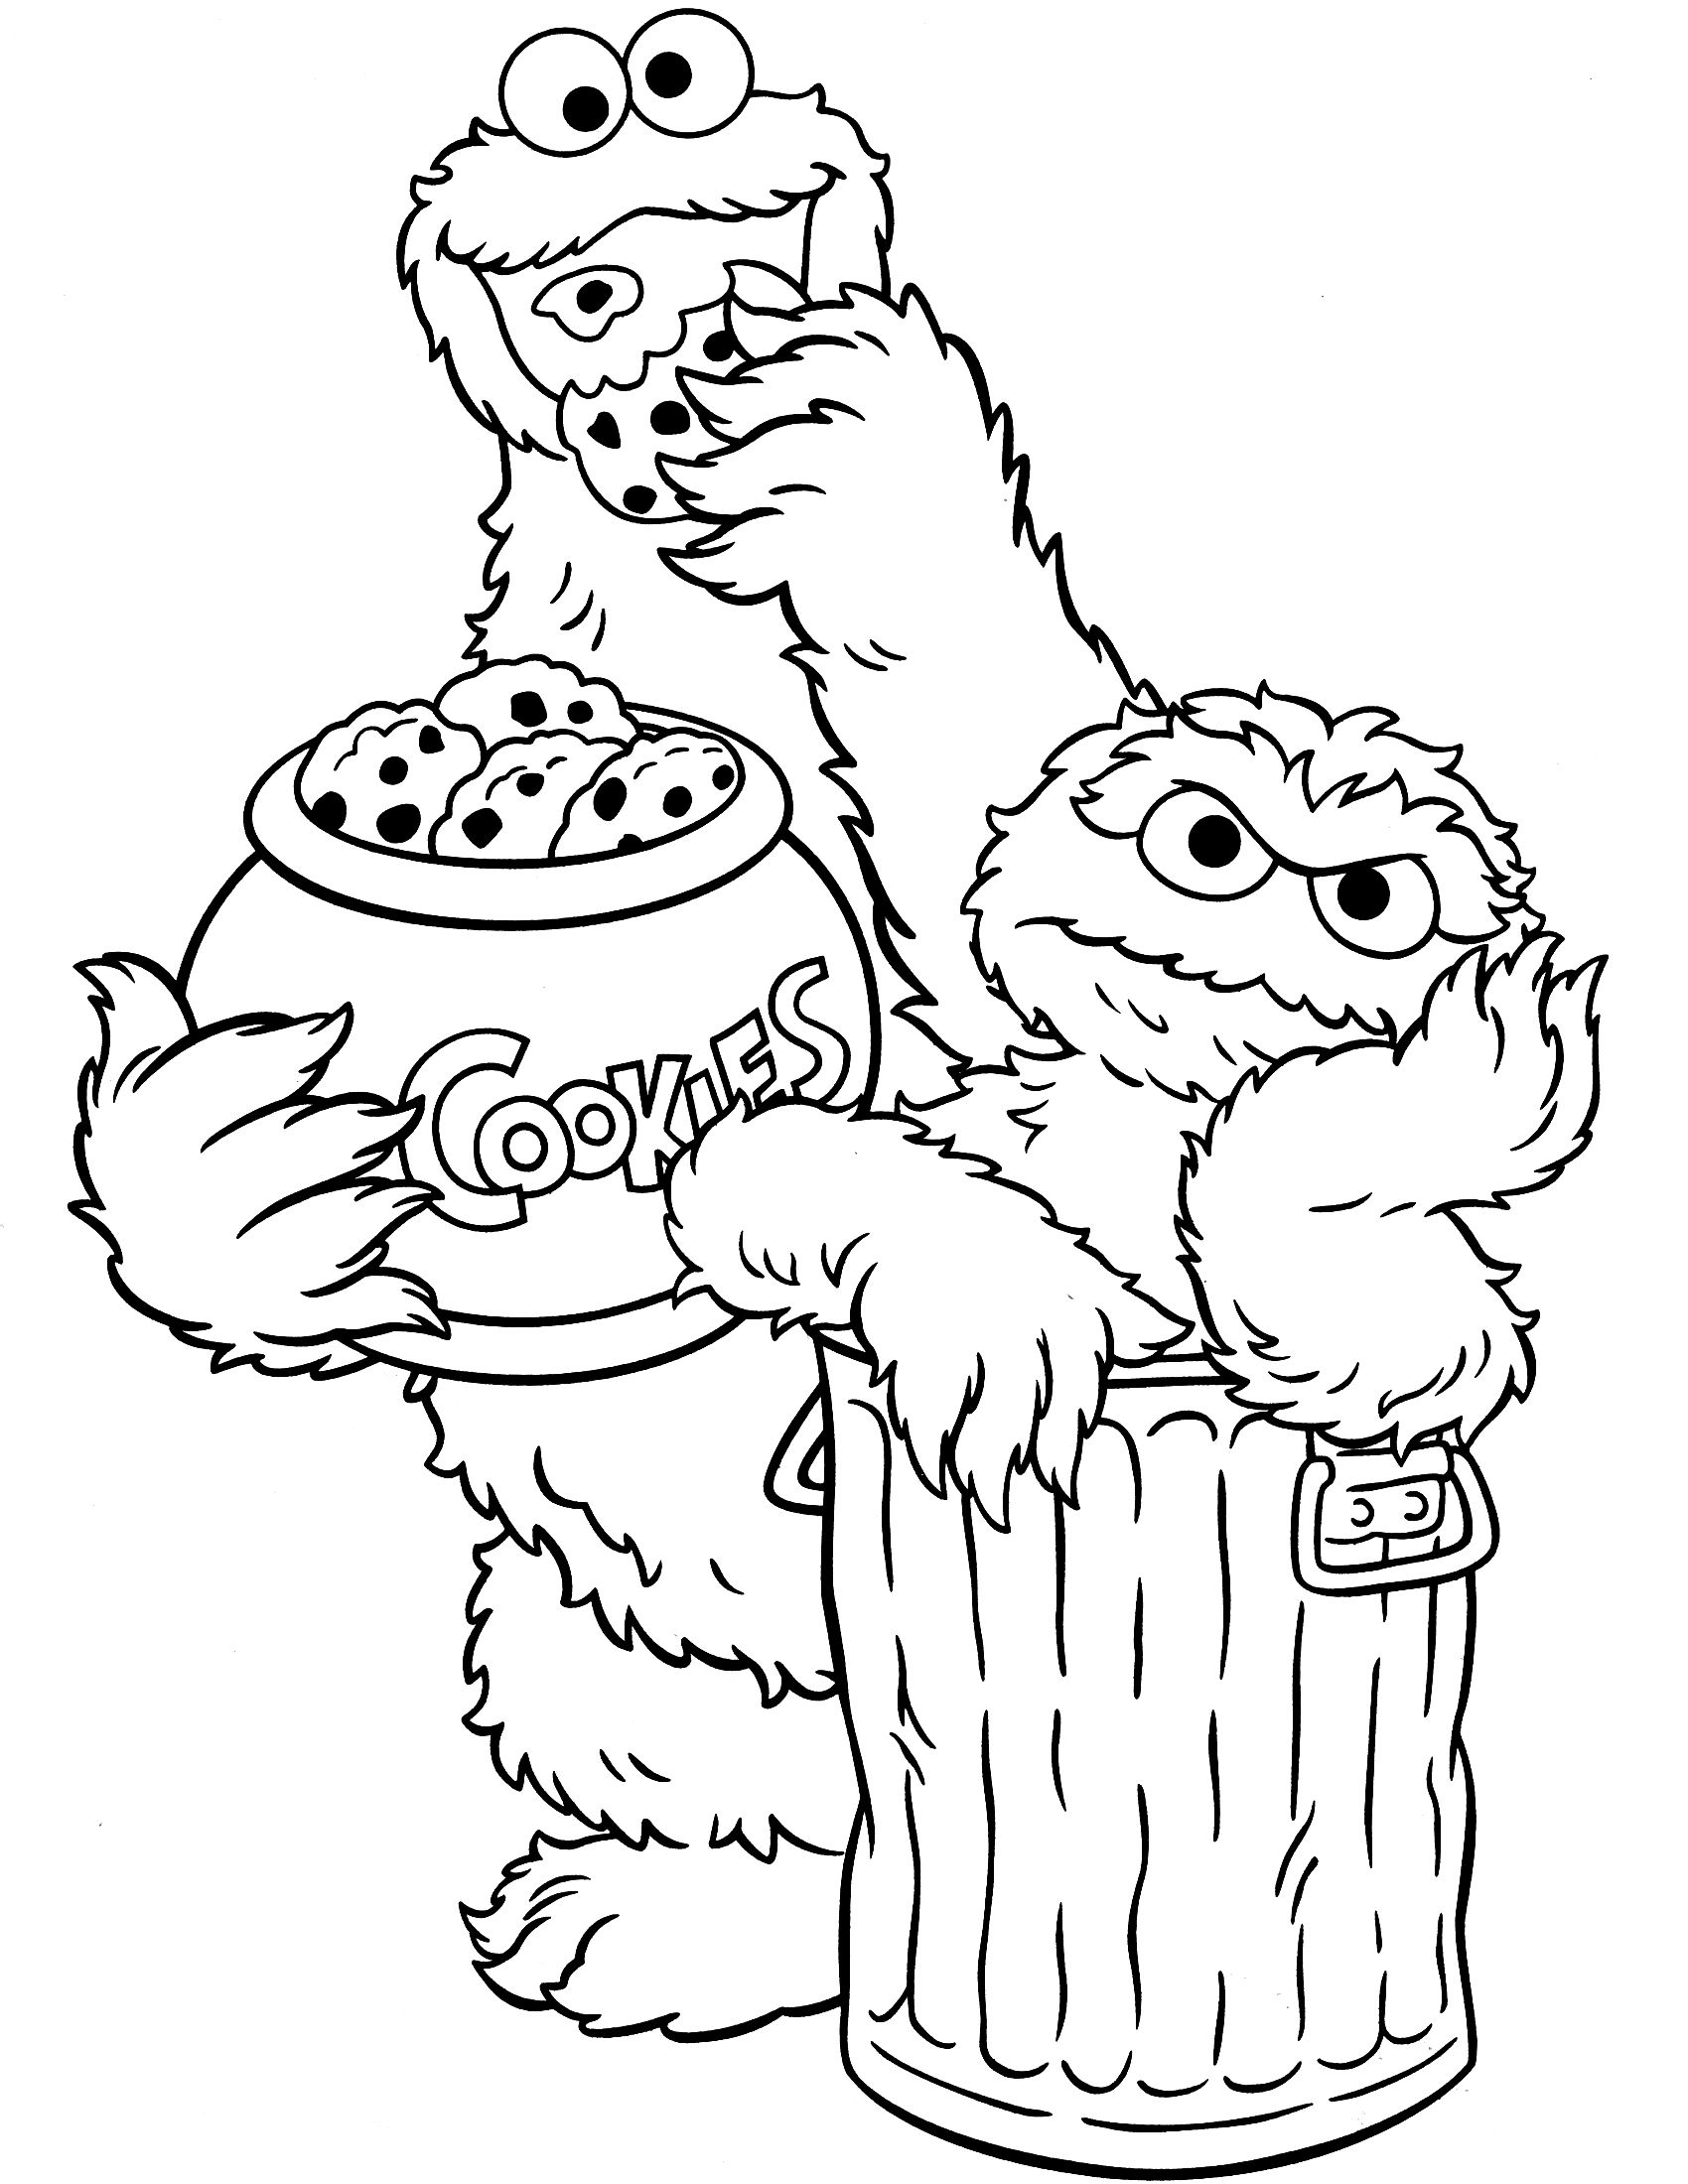 Oscar And Cookie Sesame Street Coloring Page